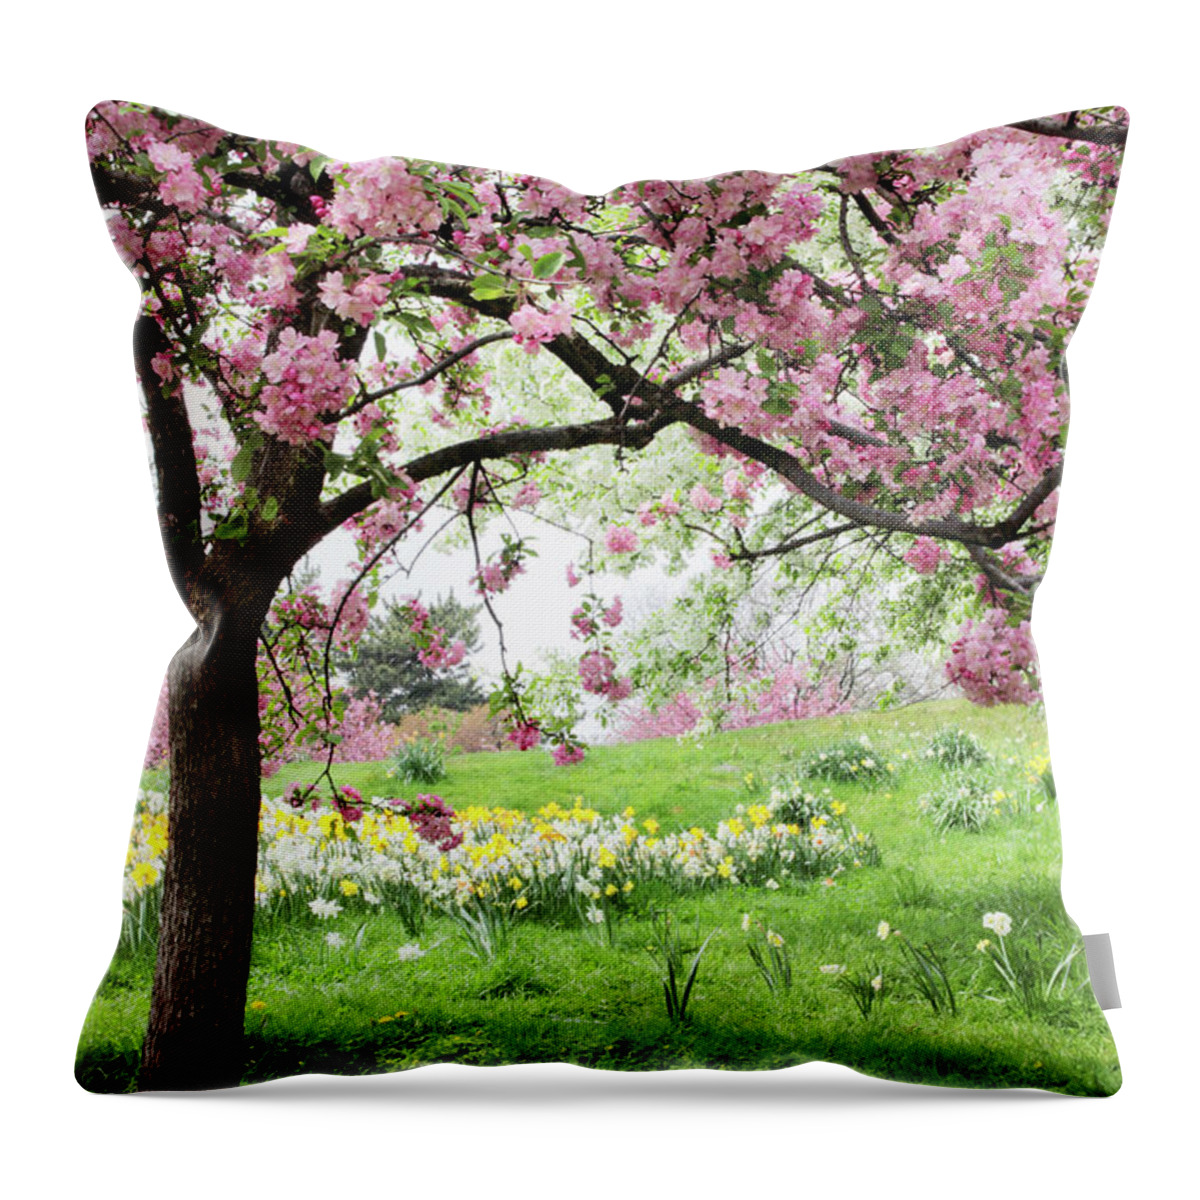 Spring Throw Pillow featuring the photograph Spring Fever by Jessica Jenney